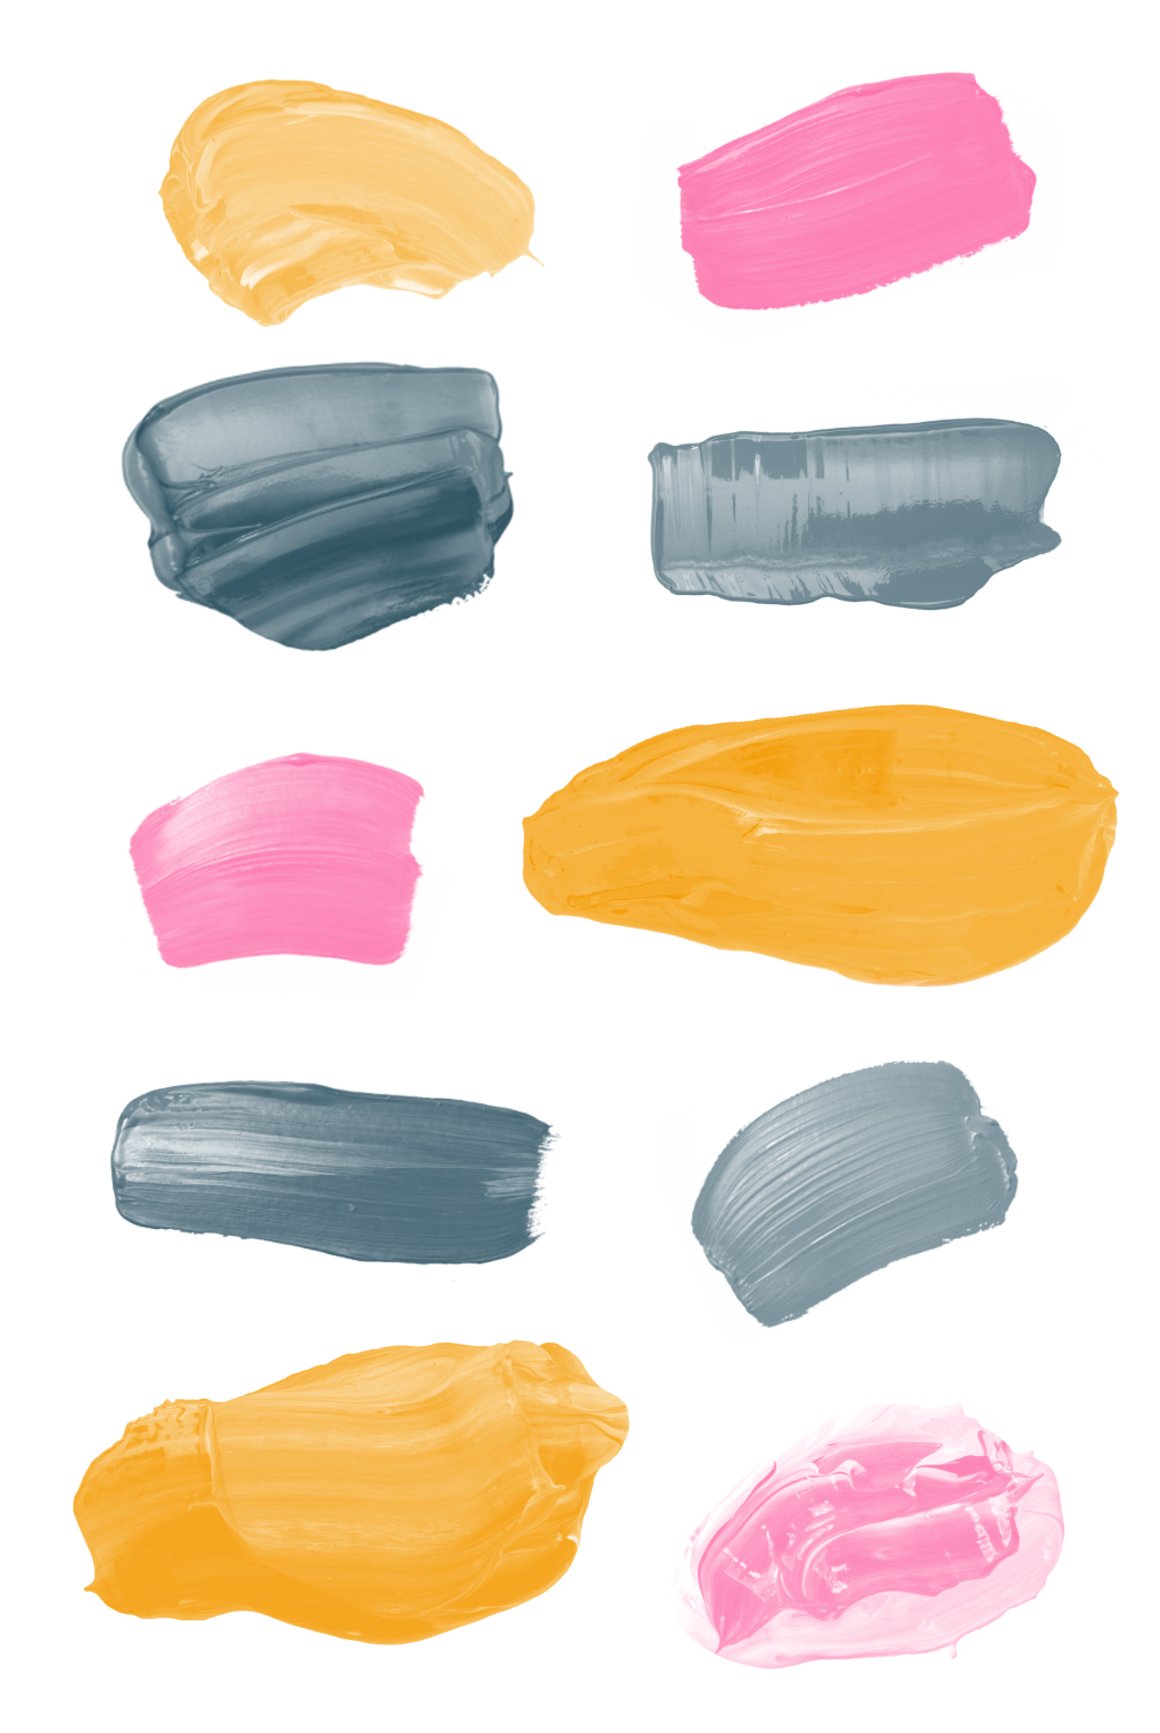 Brush_Set_for_Procreate_-_Dao_Trong_Le